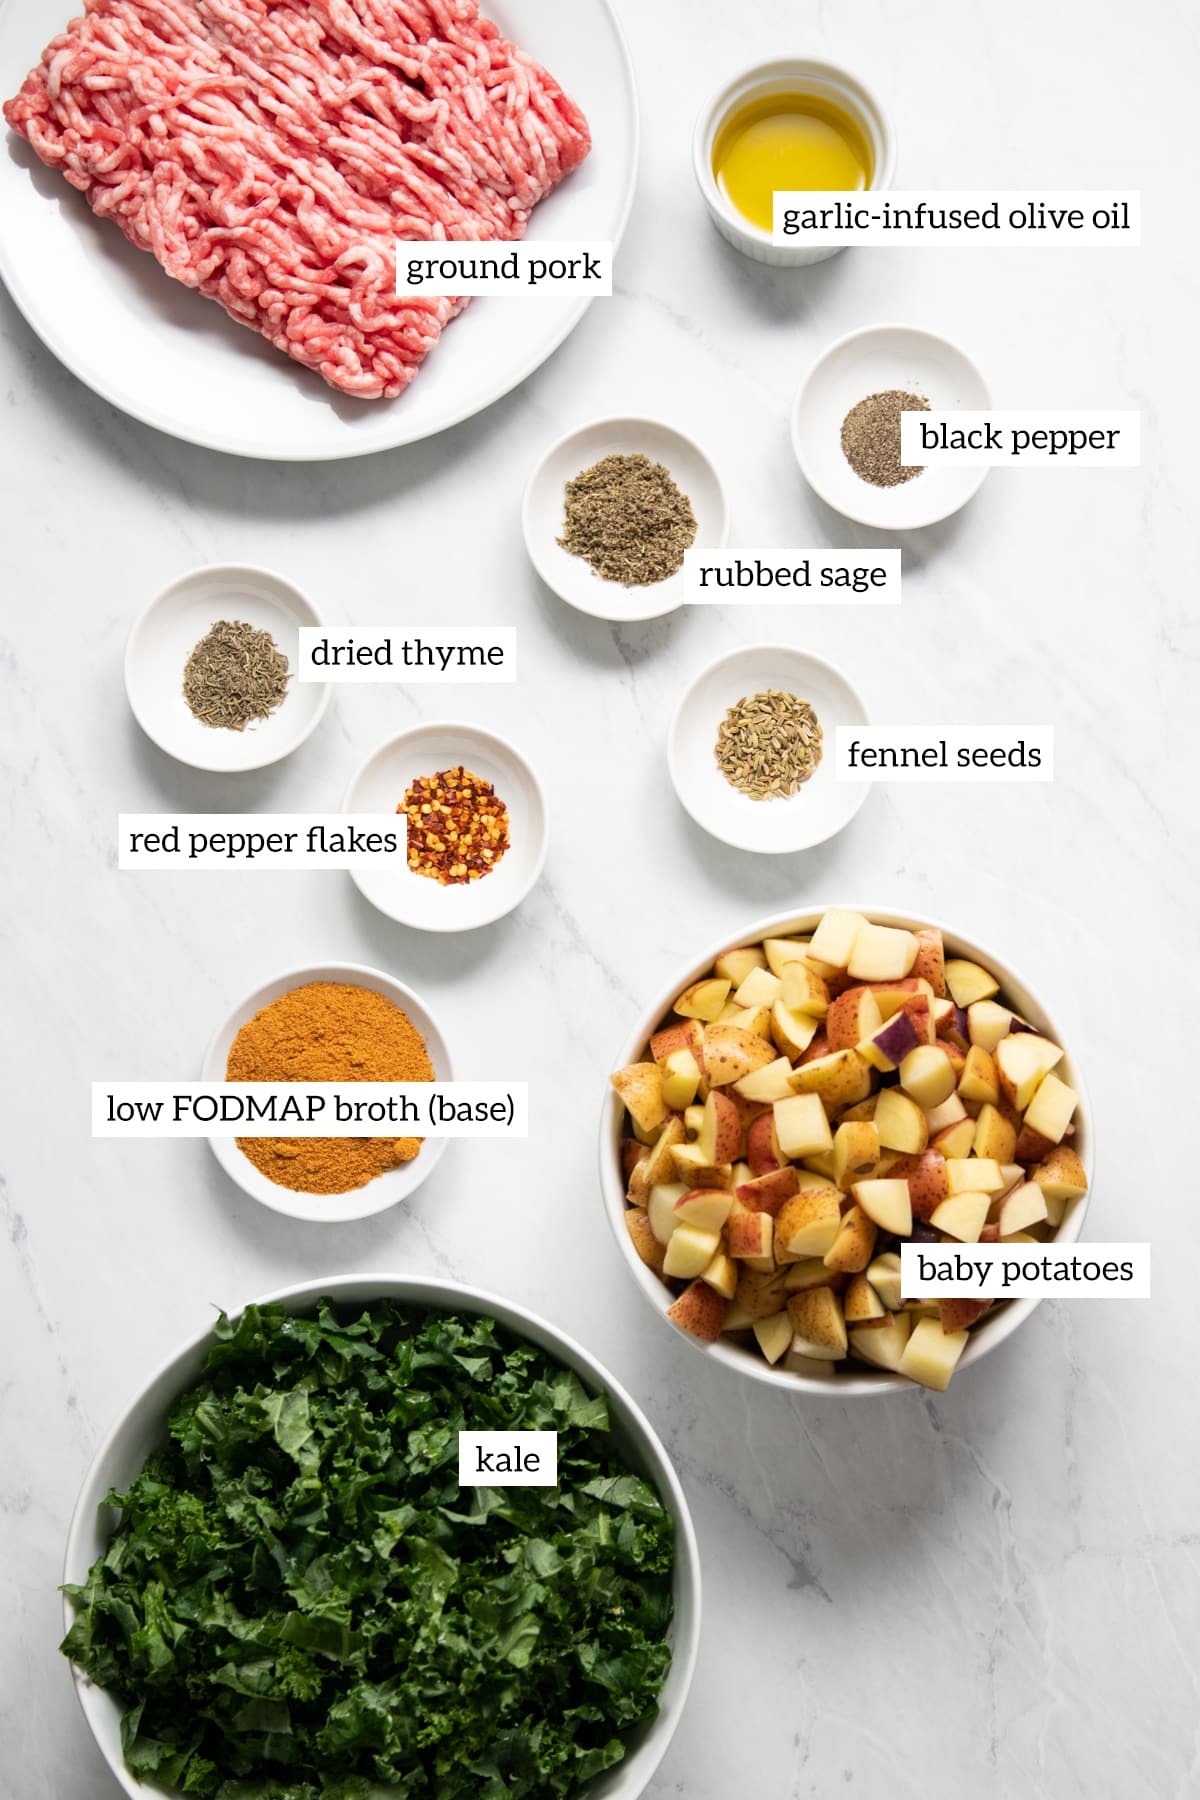 The ingredients needed to make Low FODMAP Kale, Potato, and Sausage Soup are prepared and measured out into individual containers. Each ingredient is labeled with black text.